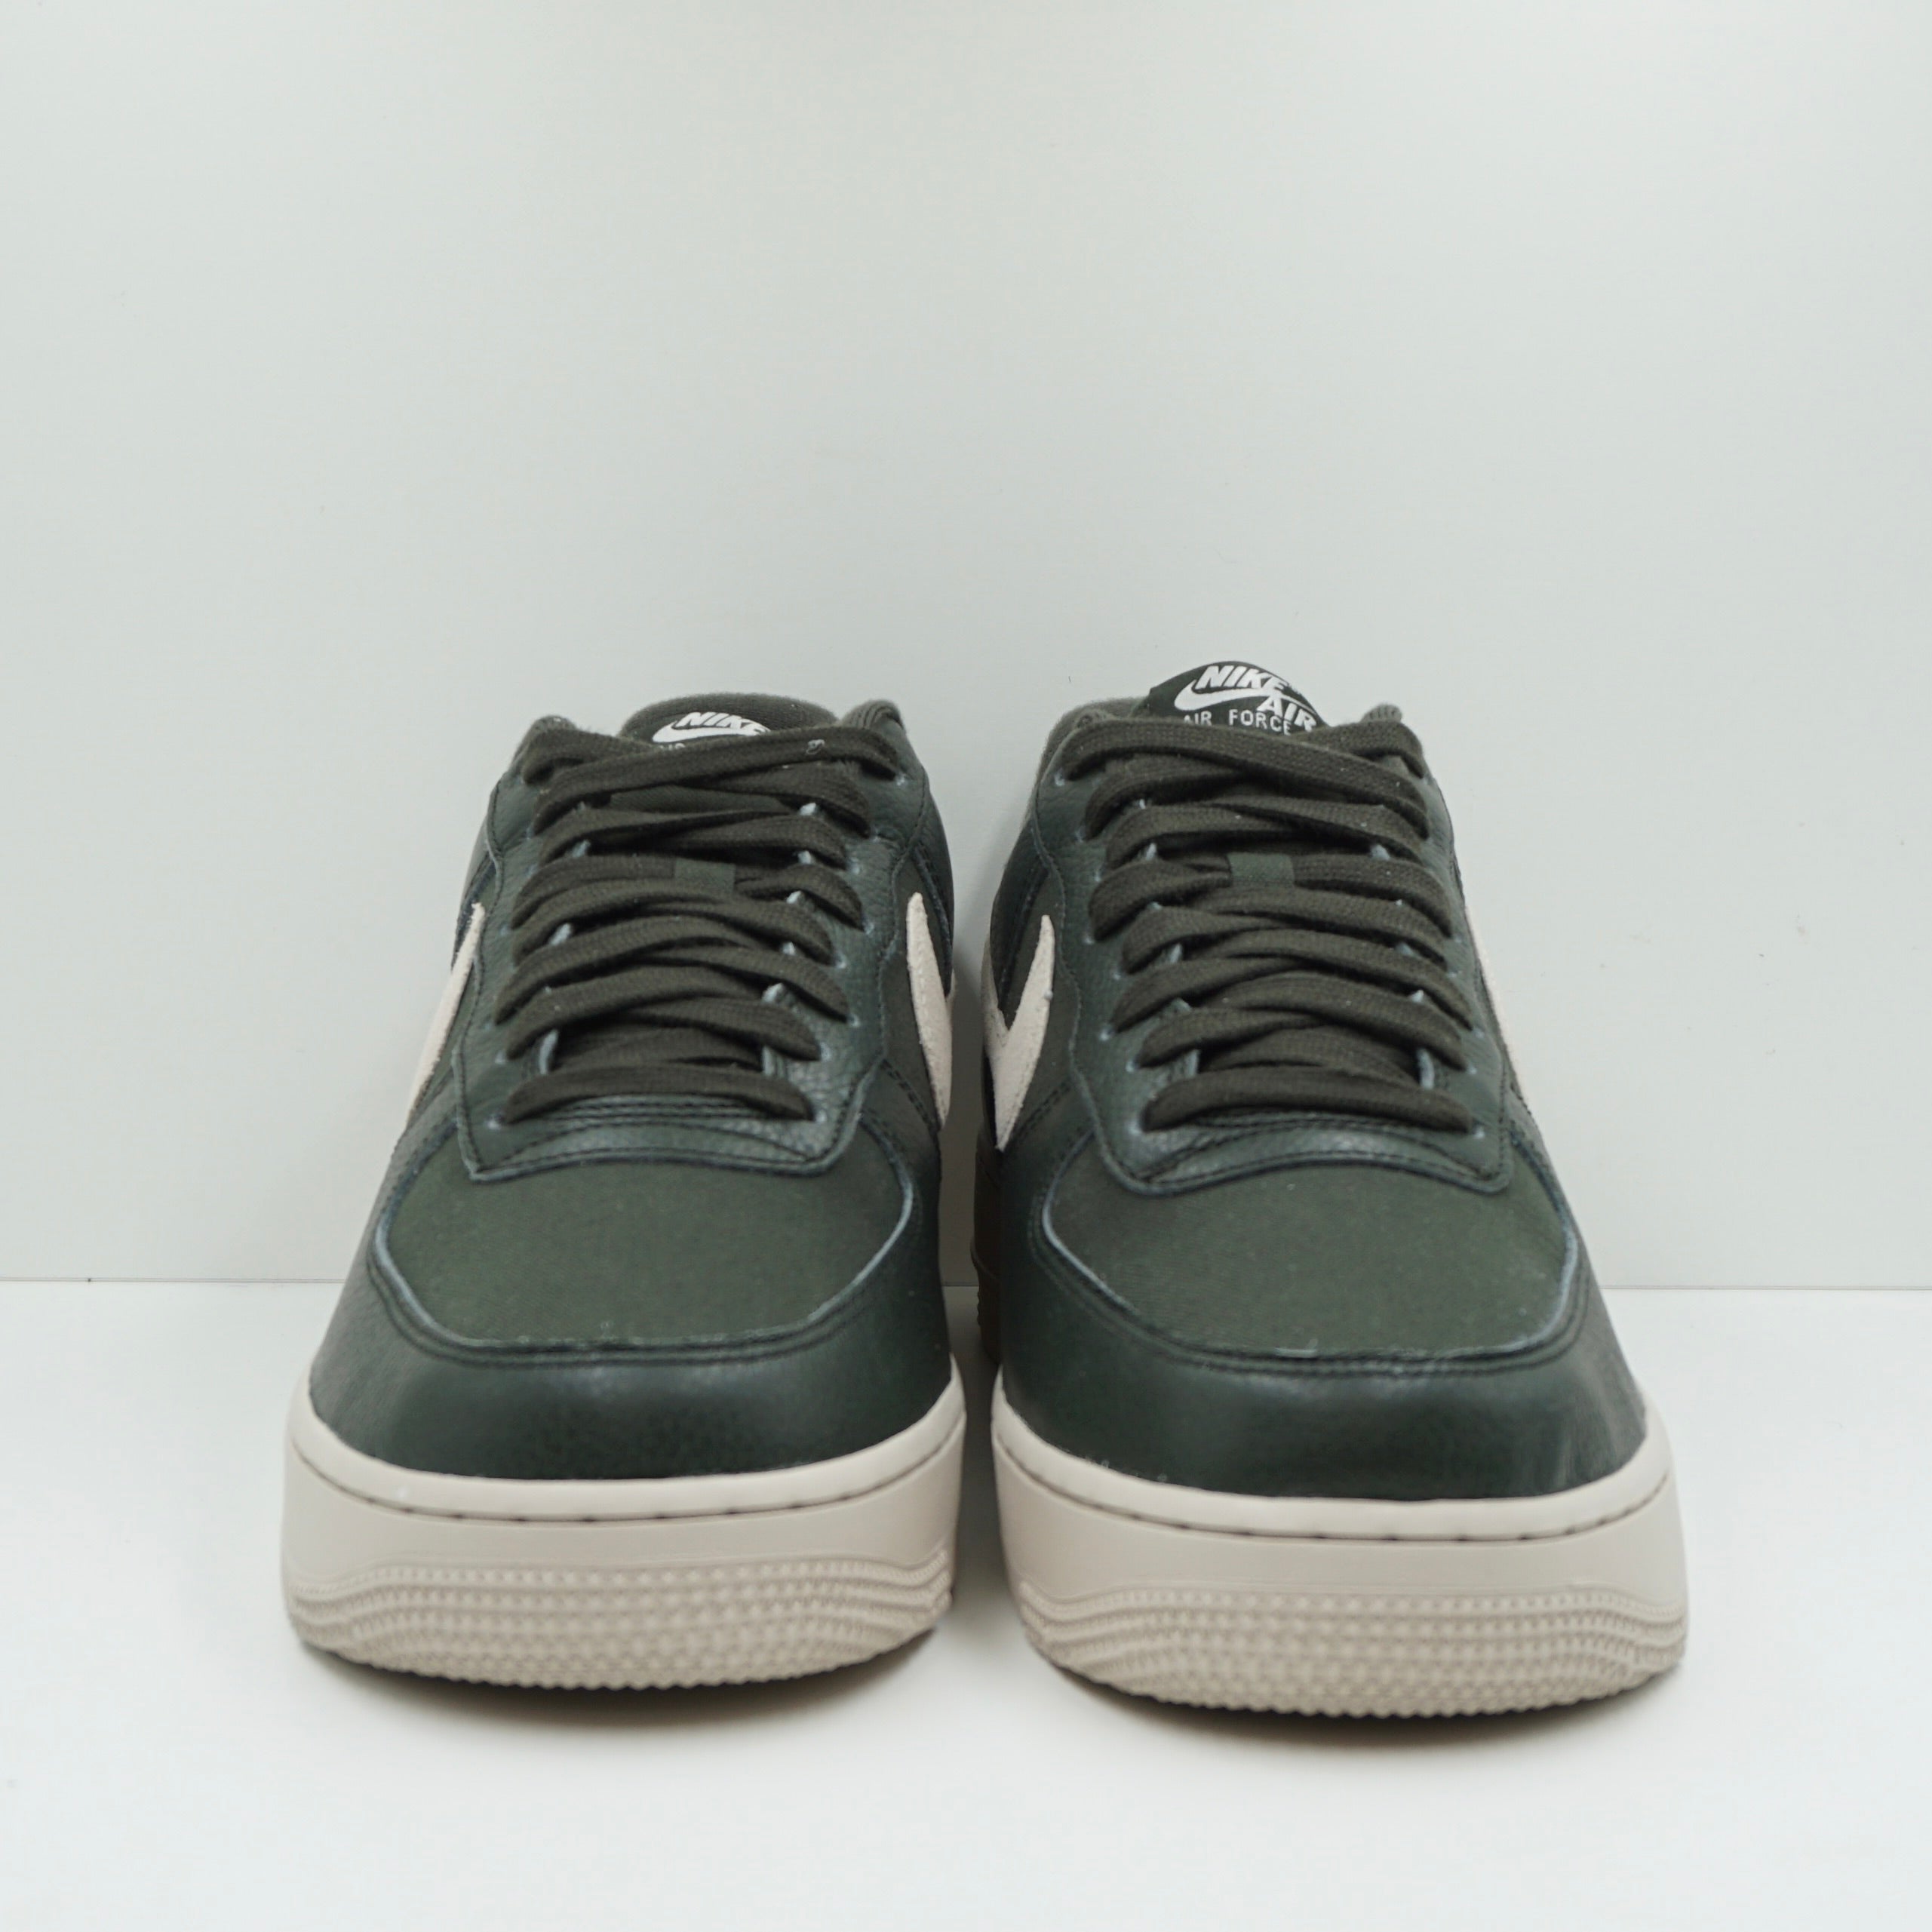 Nike Air Force 1 Low '07 Sequoia